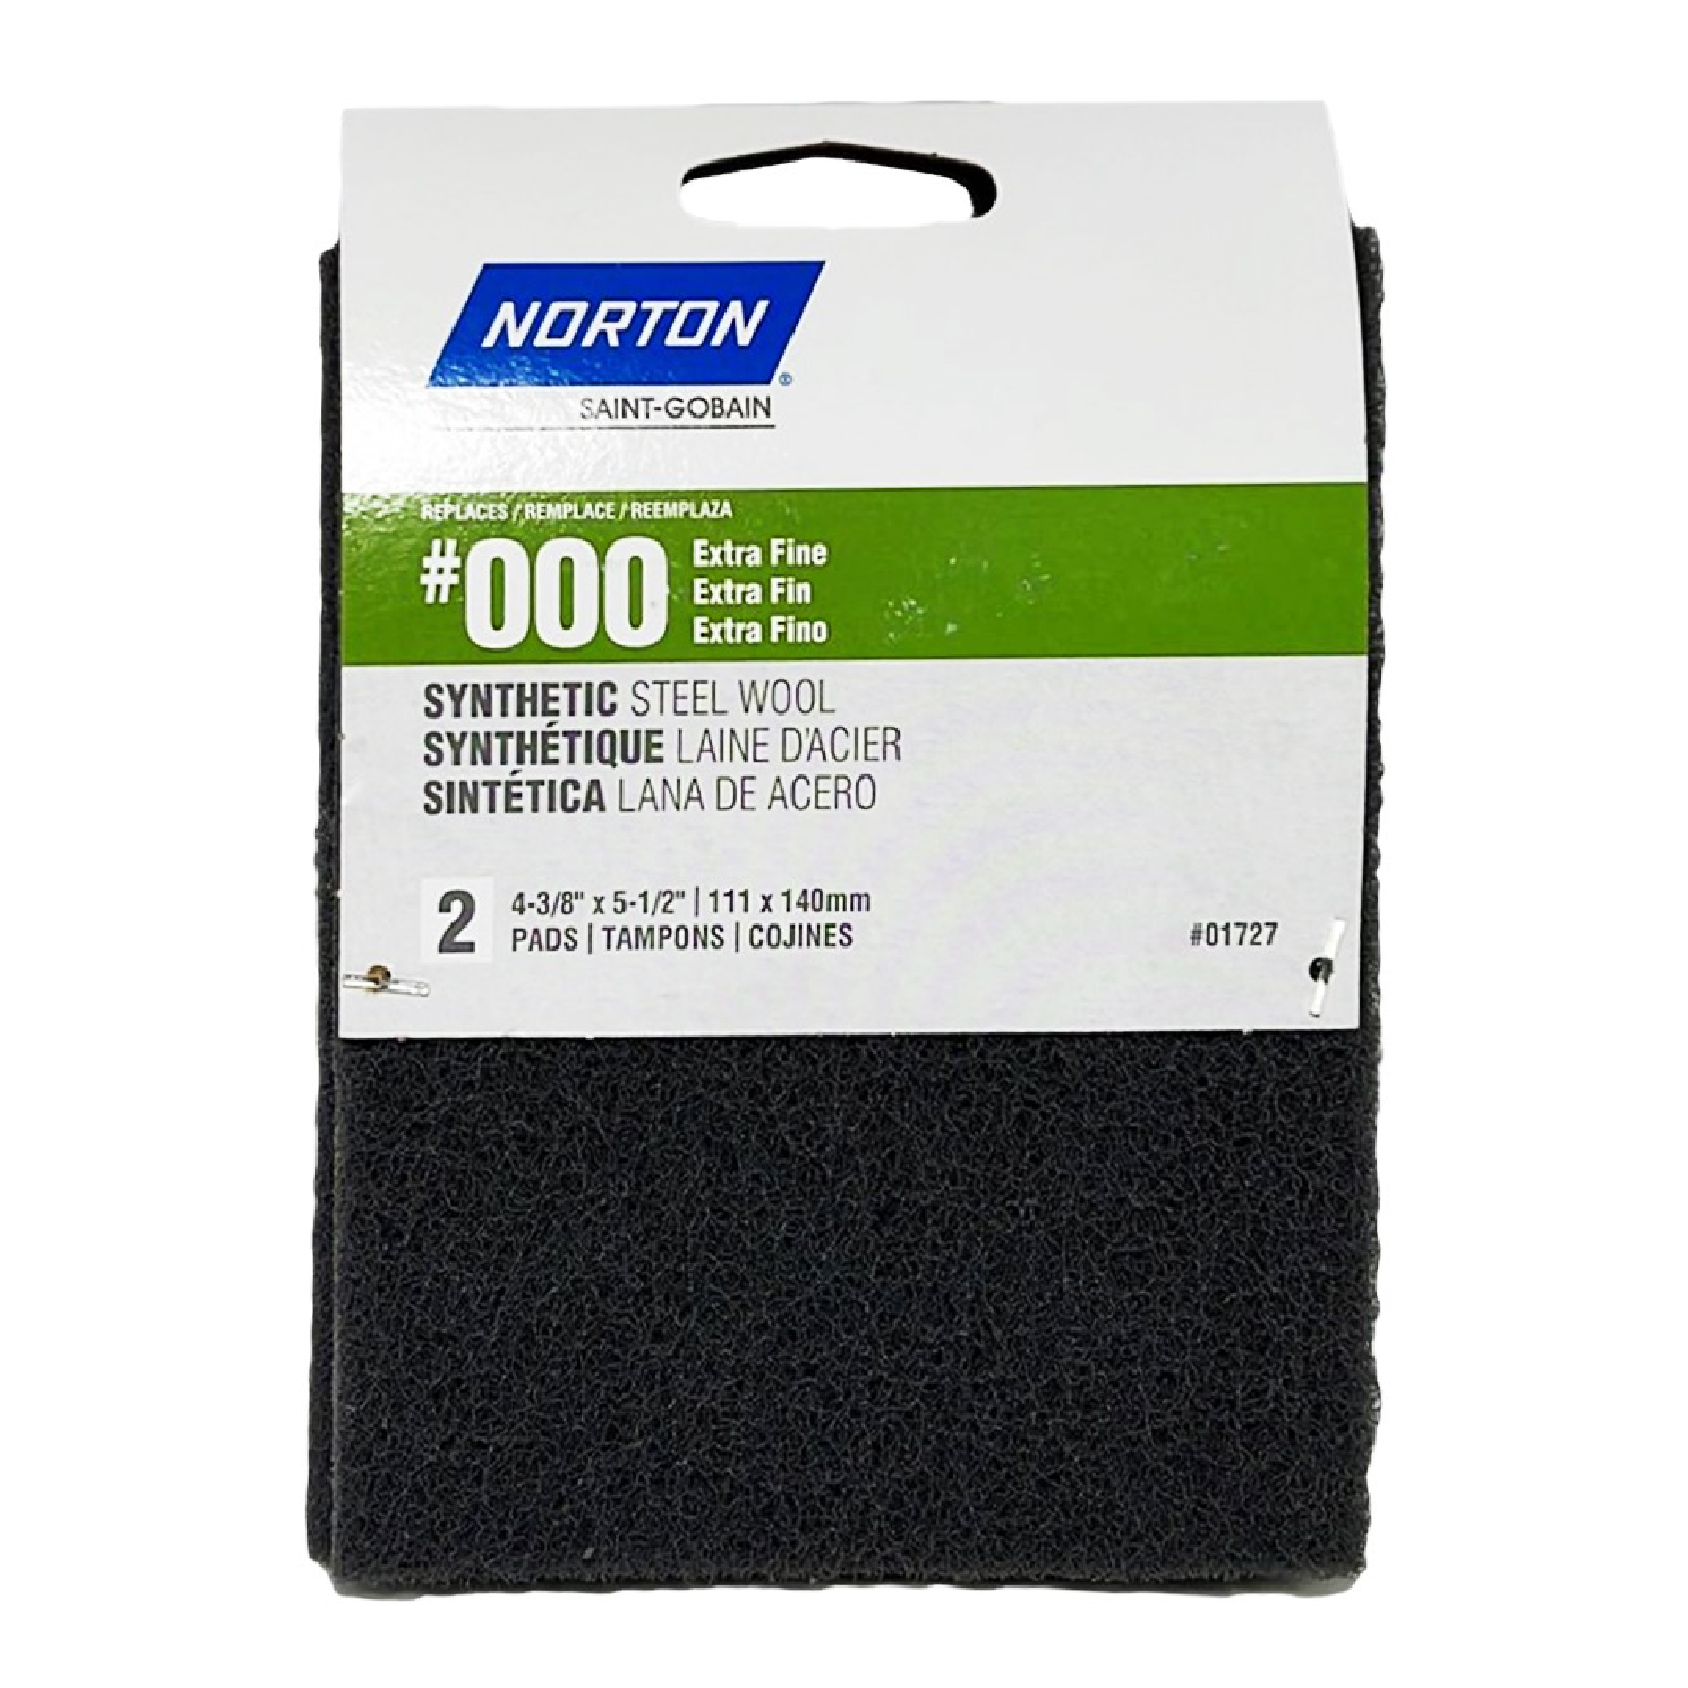 Norton Abrasives Synthetic '000' Gray Extra Fine Steel Wool Pads 2PC/Pack 7660701727